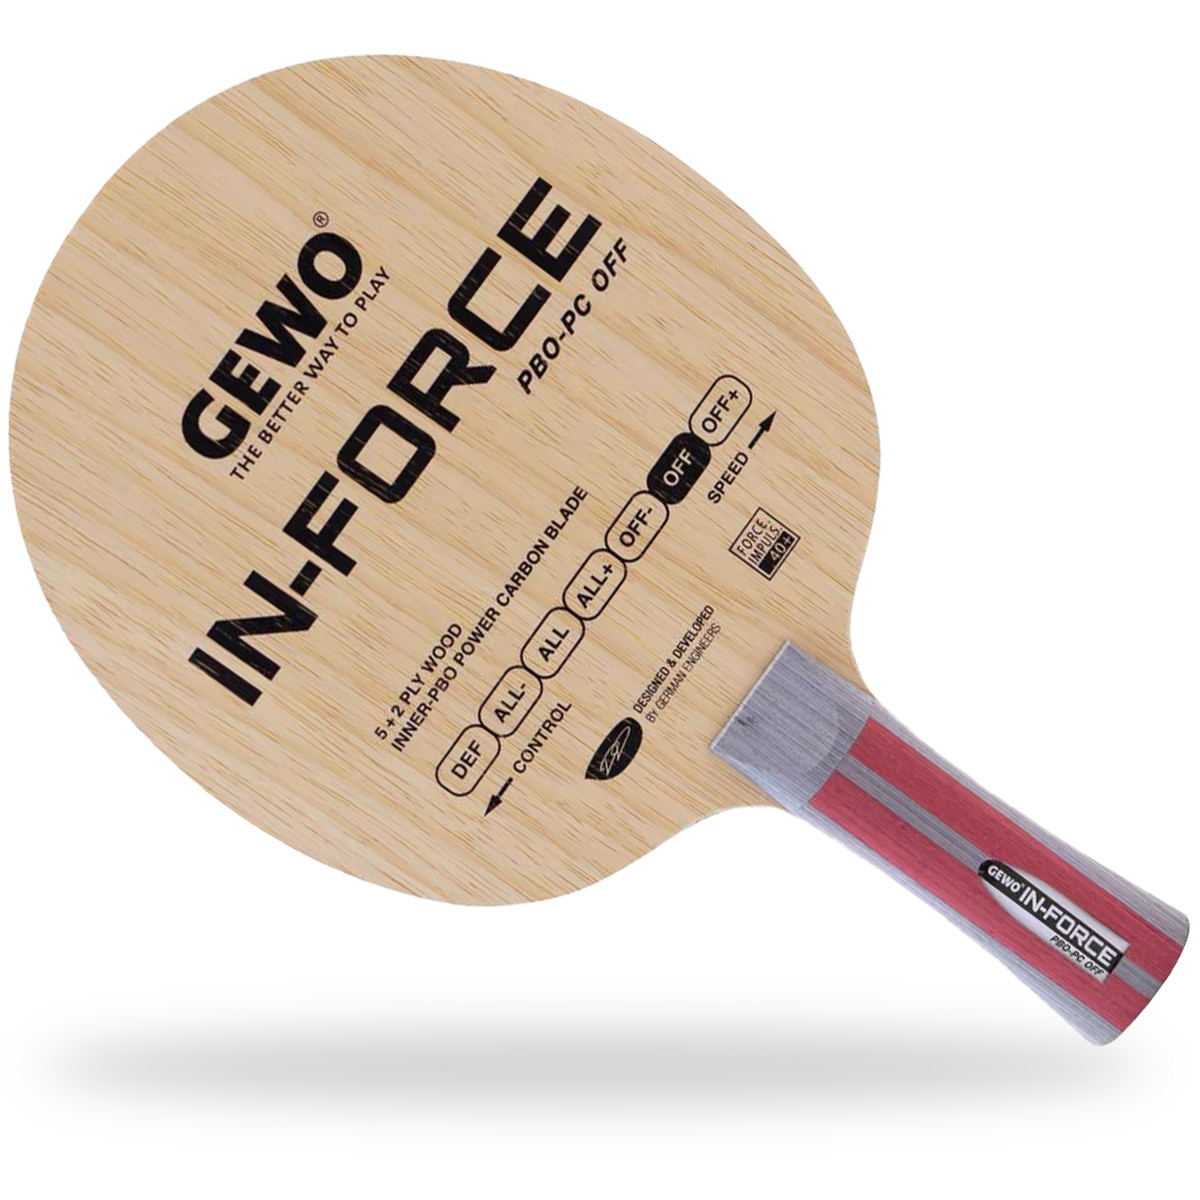 GEWO Blade In-Force PBO-PC OFF